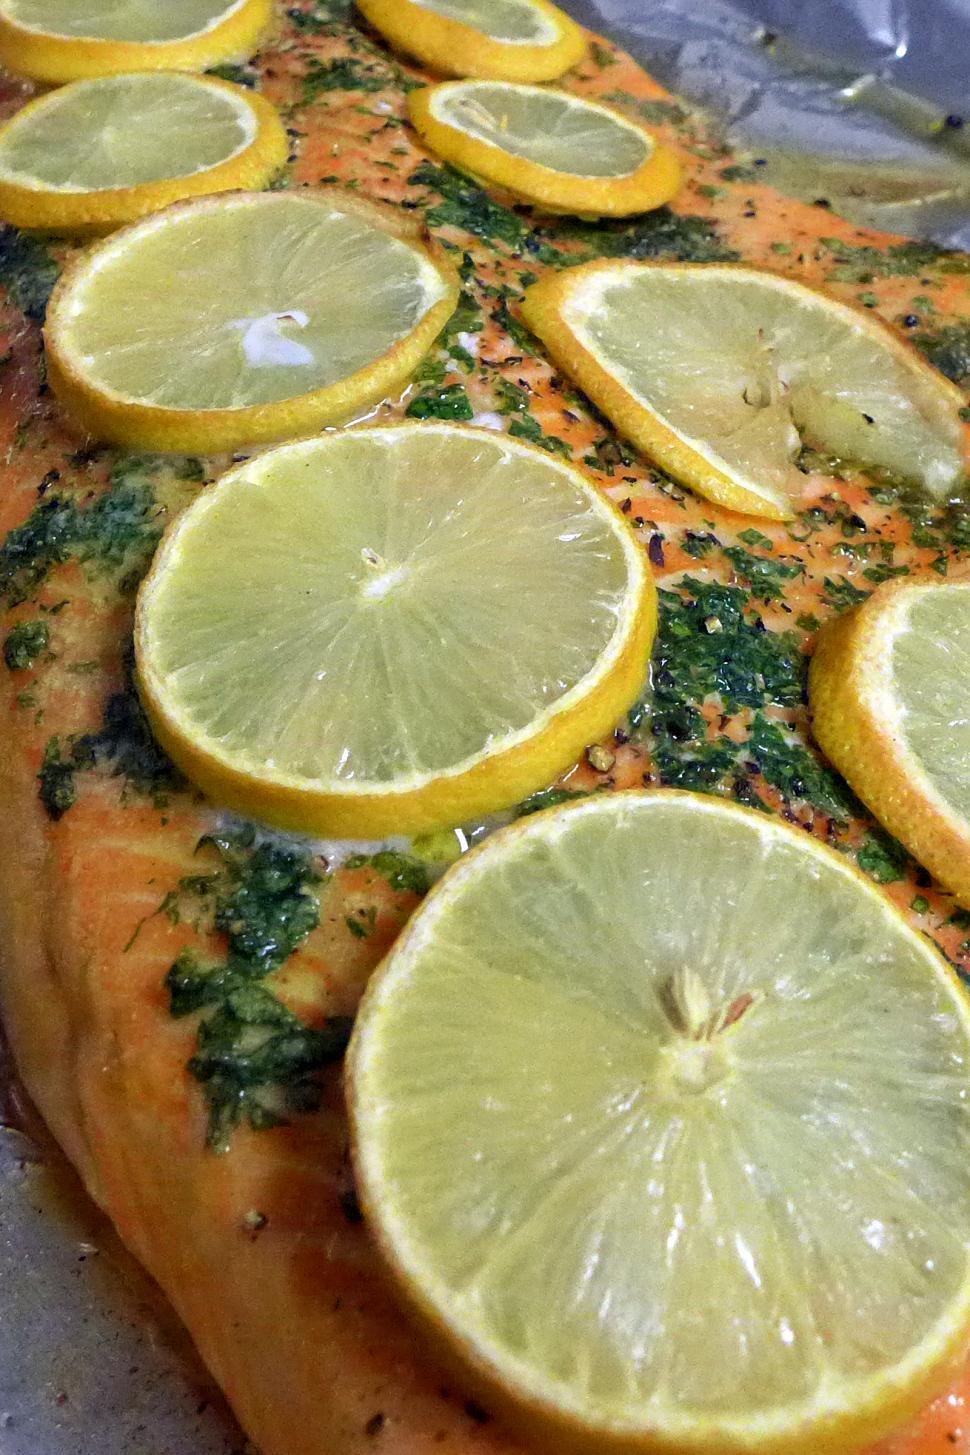 Free Image of Baked Salmon with Lemon Slices 